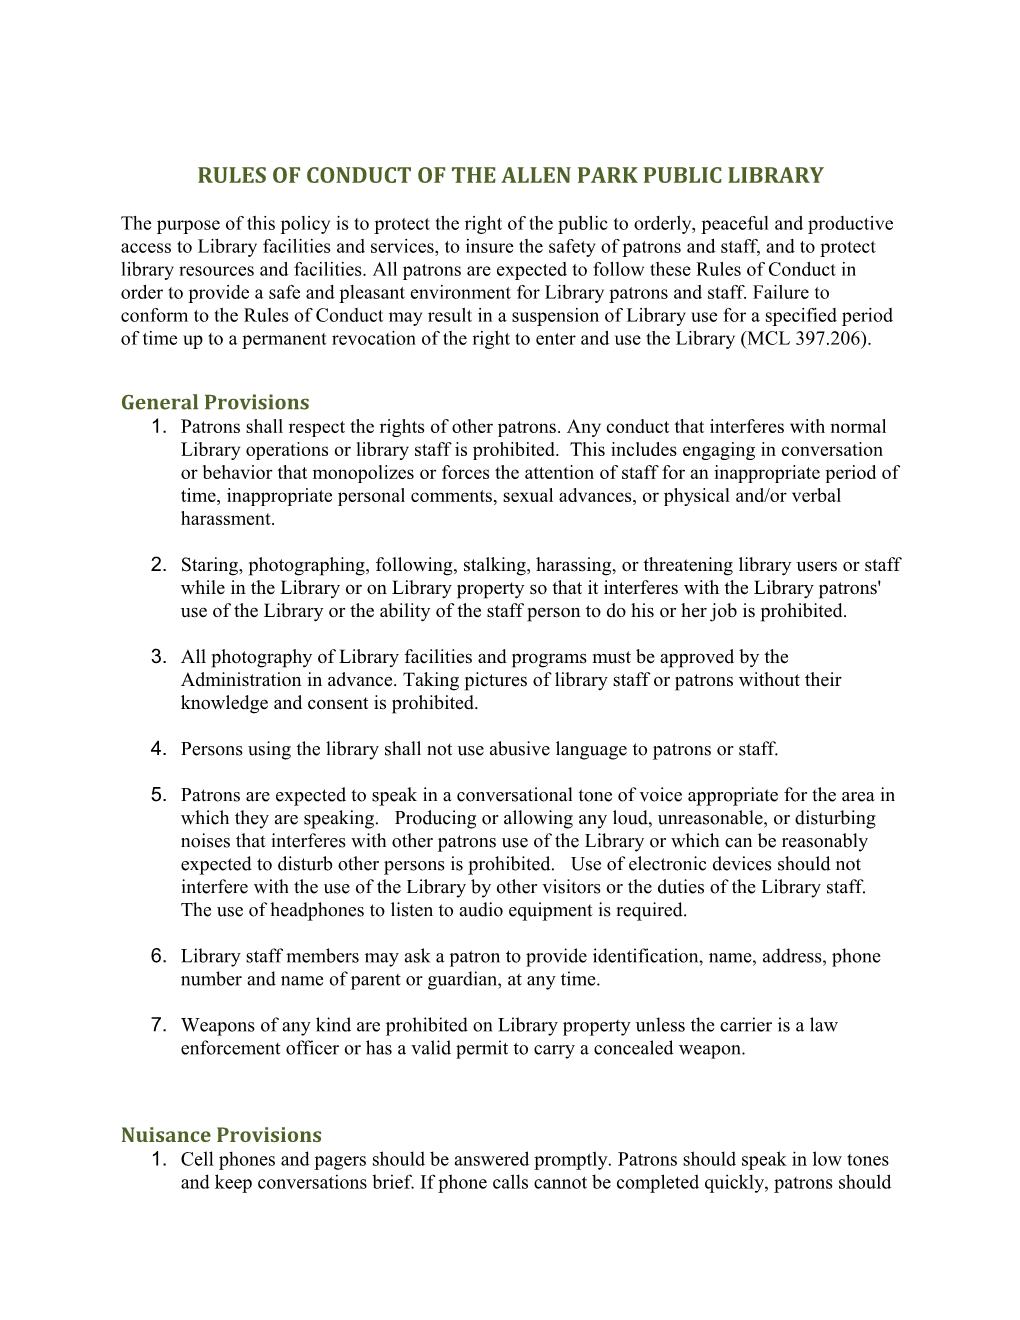 Rules of Conduct of the Allen Park Public Library